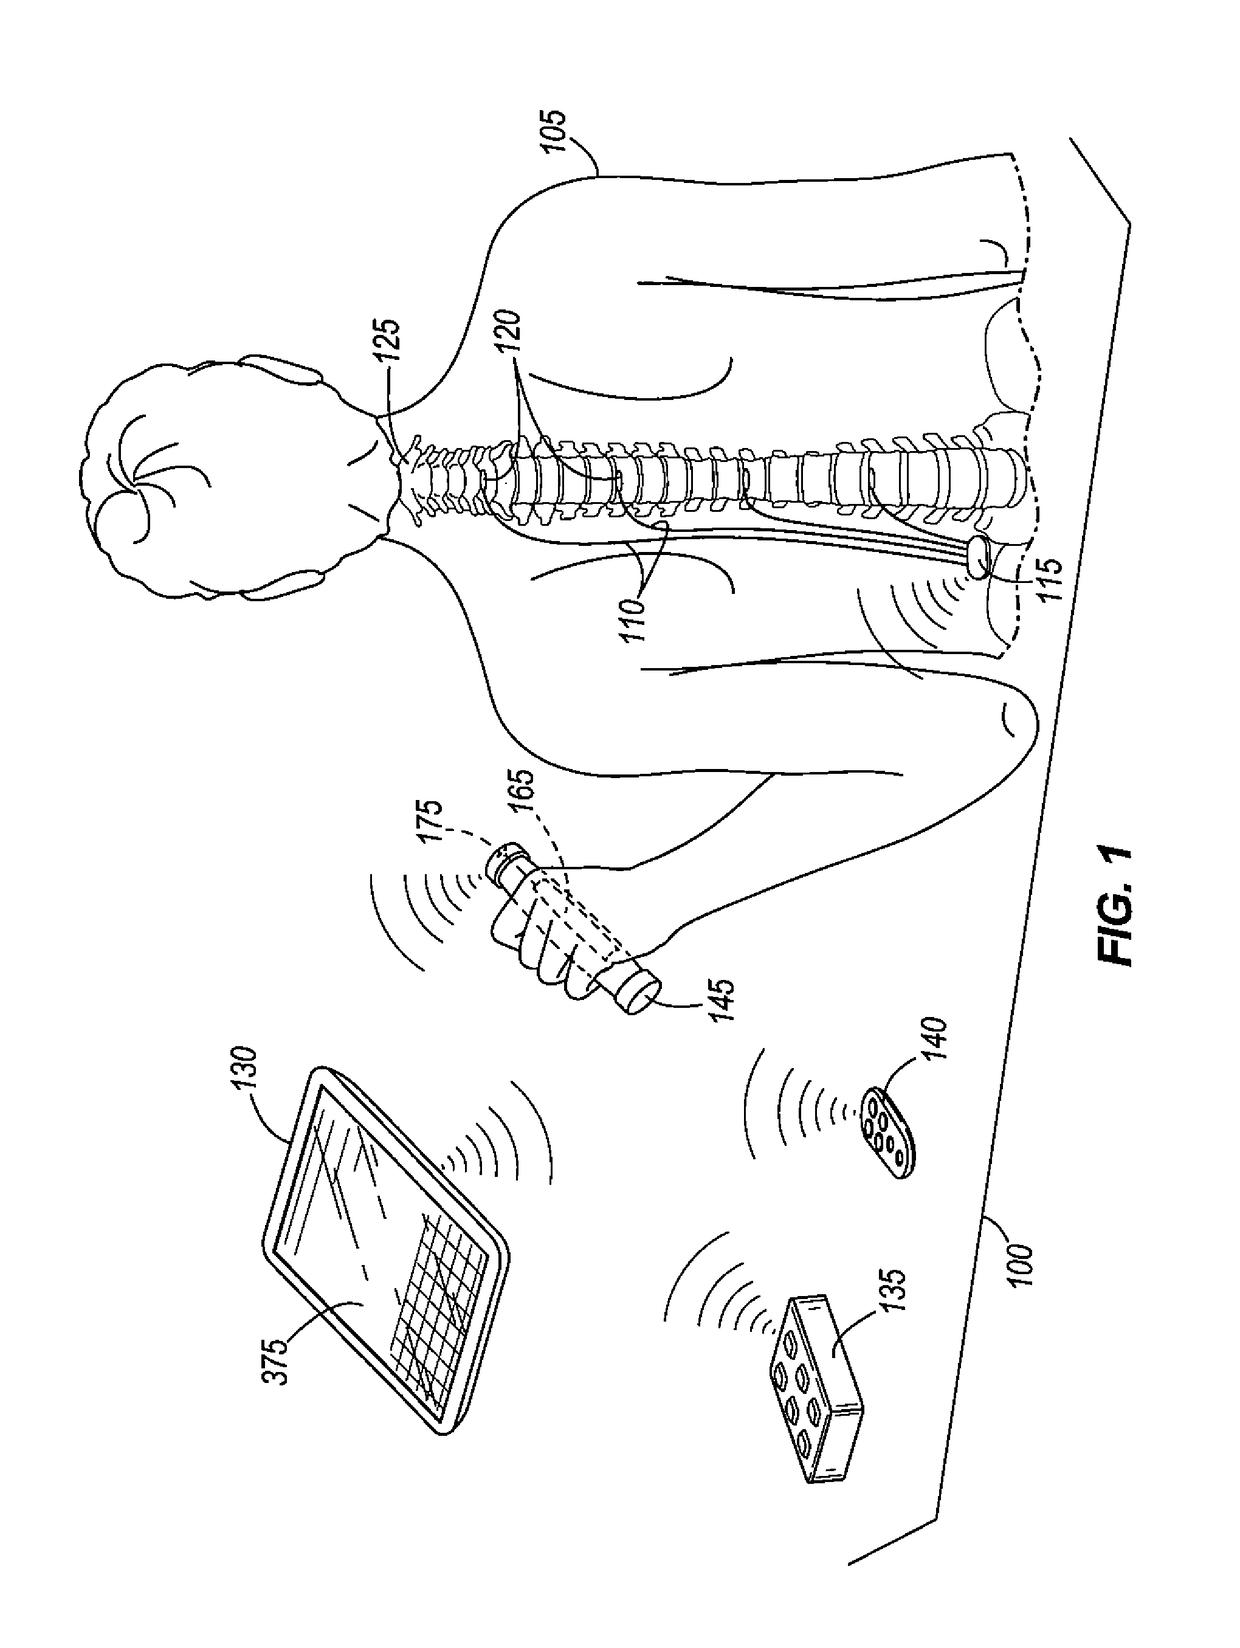 System and method of establishing a protocol for providing electrical stimulation with a stimulation system to treat a patient